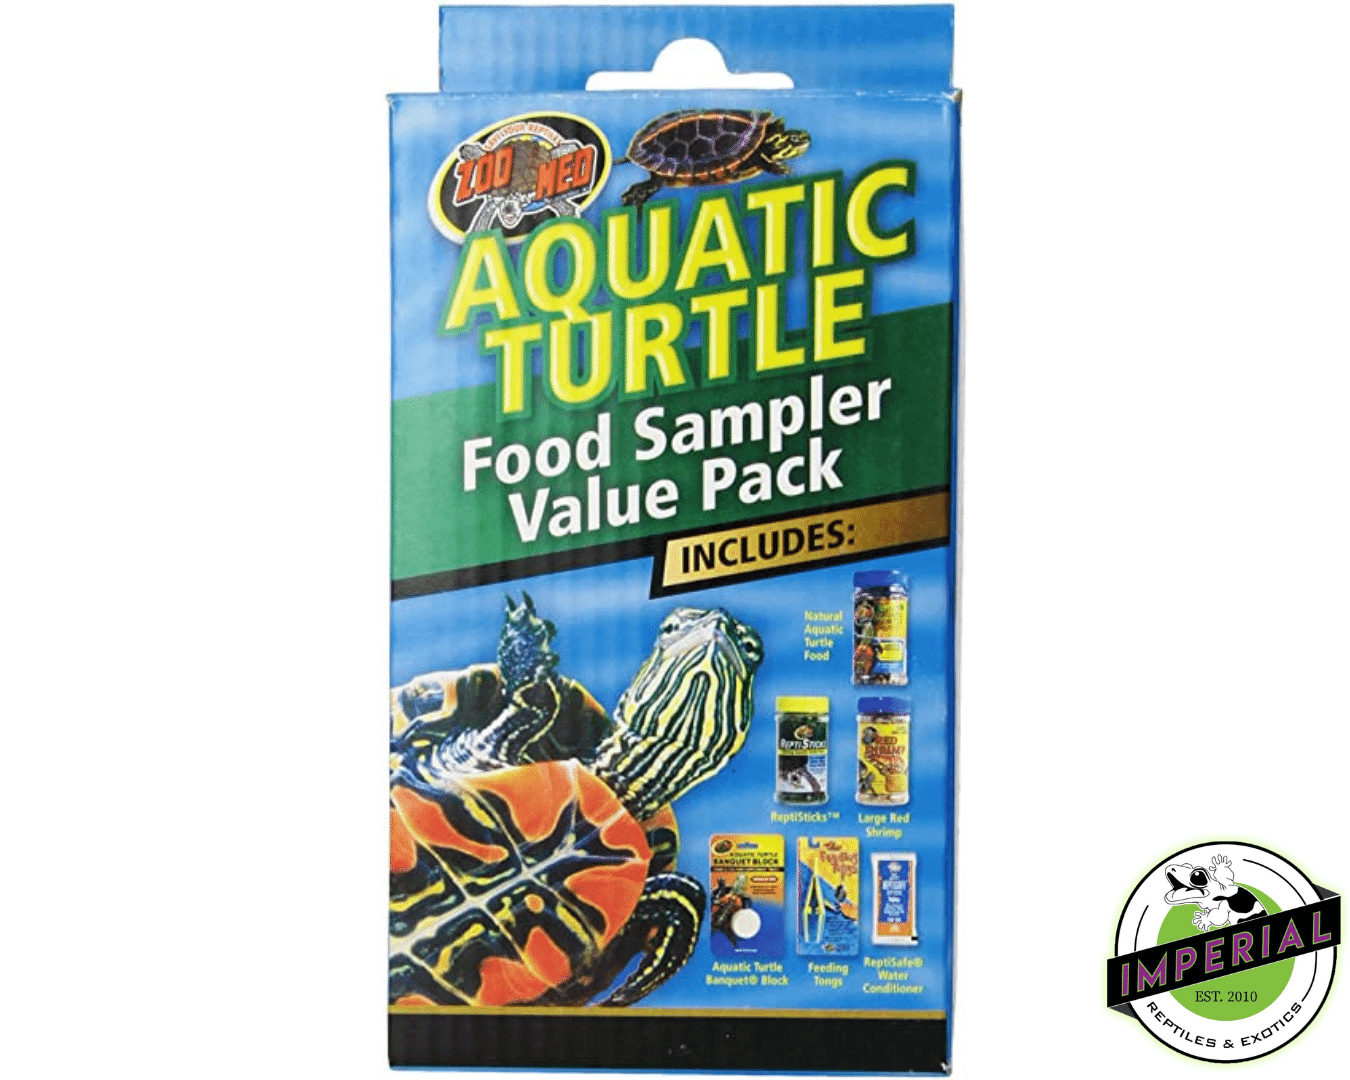 buy natural aquatic turtle food sampler value pack for sale online, cheap reptile supplies near me